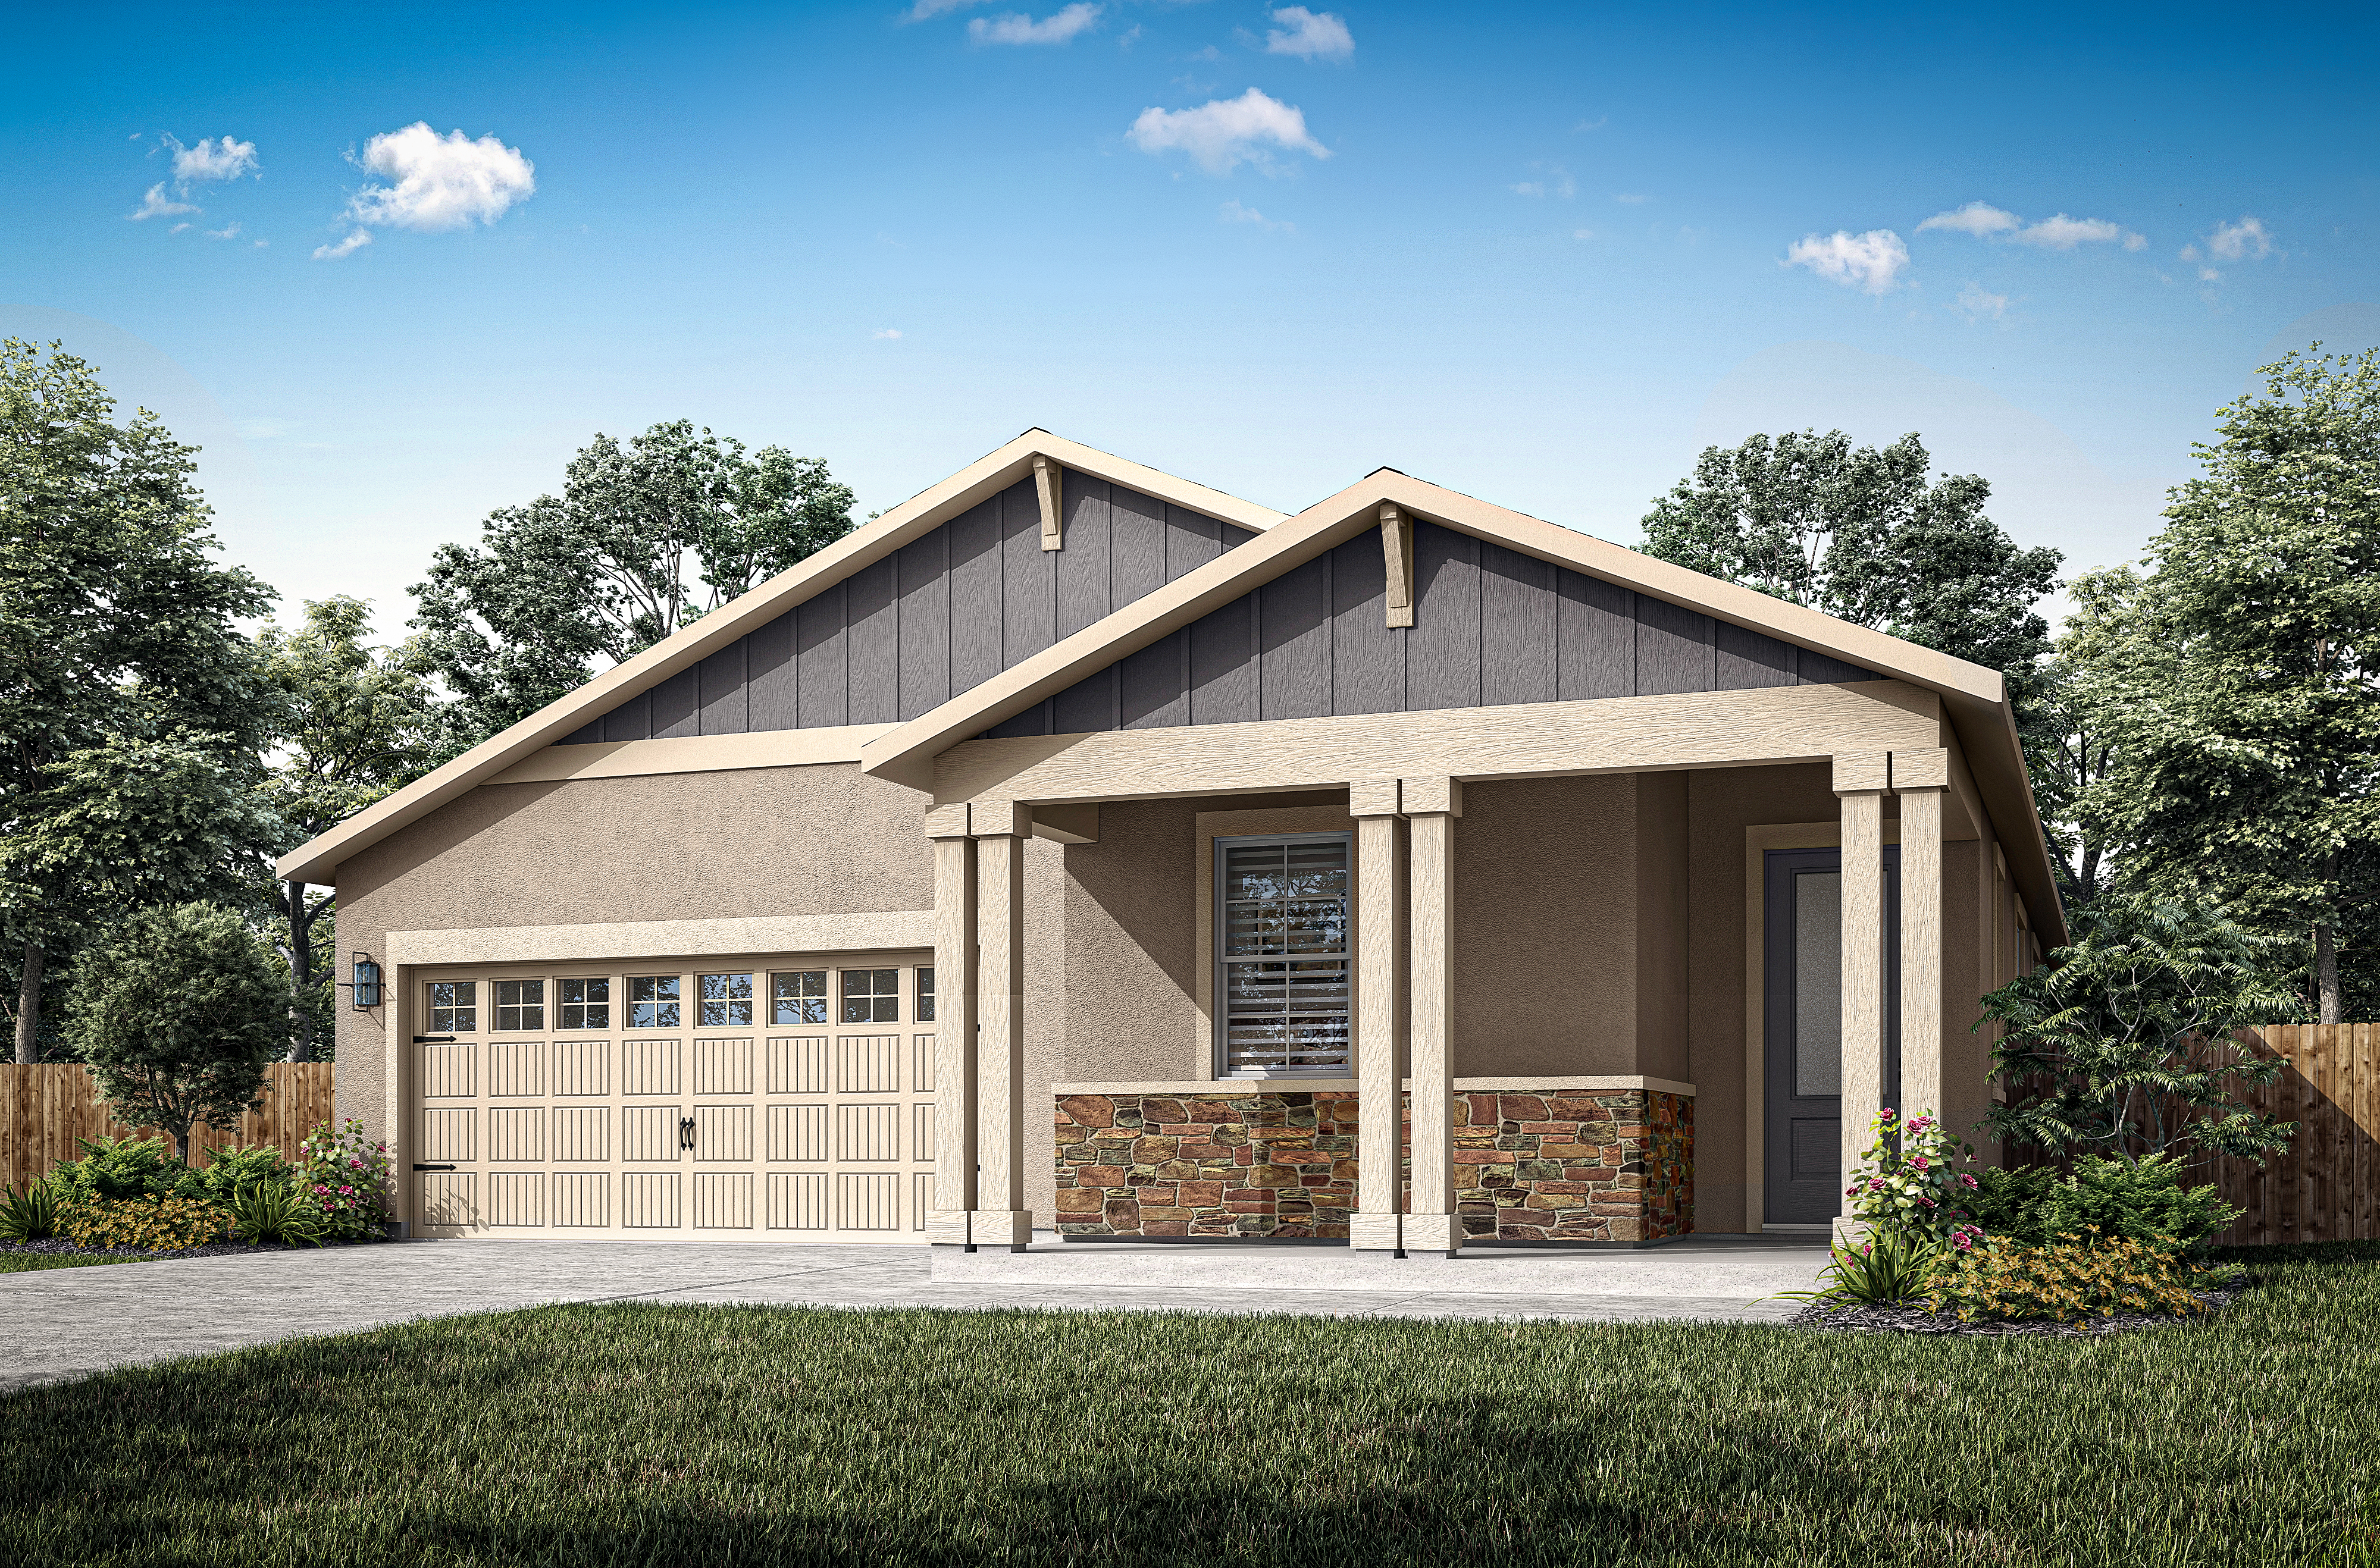 Diamond Bar East by LGI Homes offers a variety of brand-new, move-in ready homes located in Riverbank near Modesto.